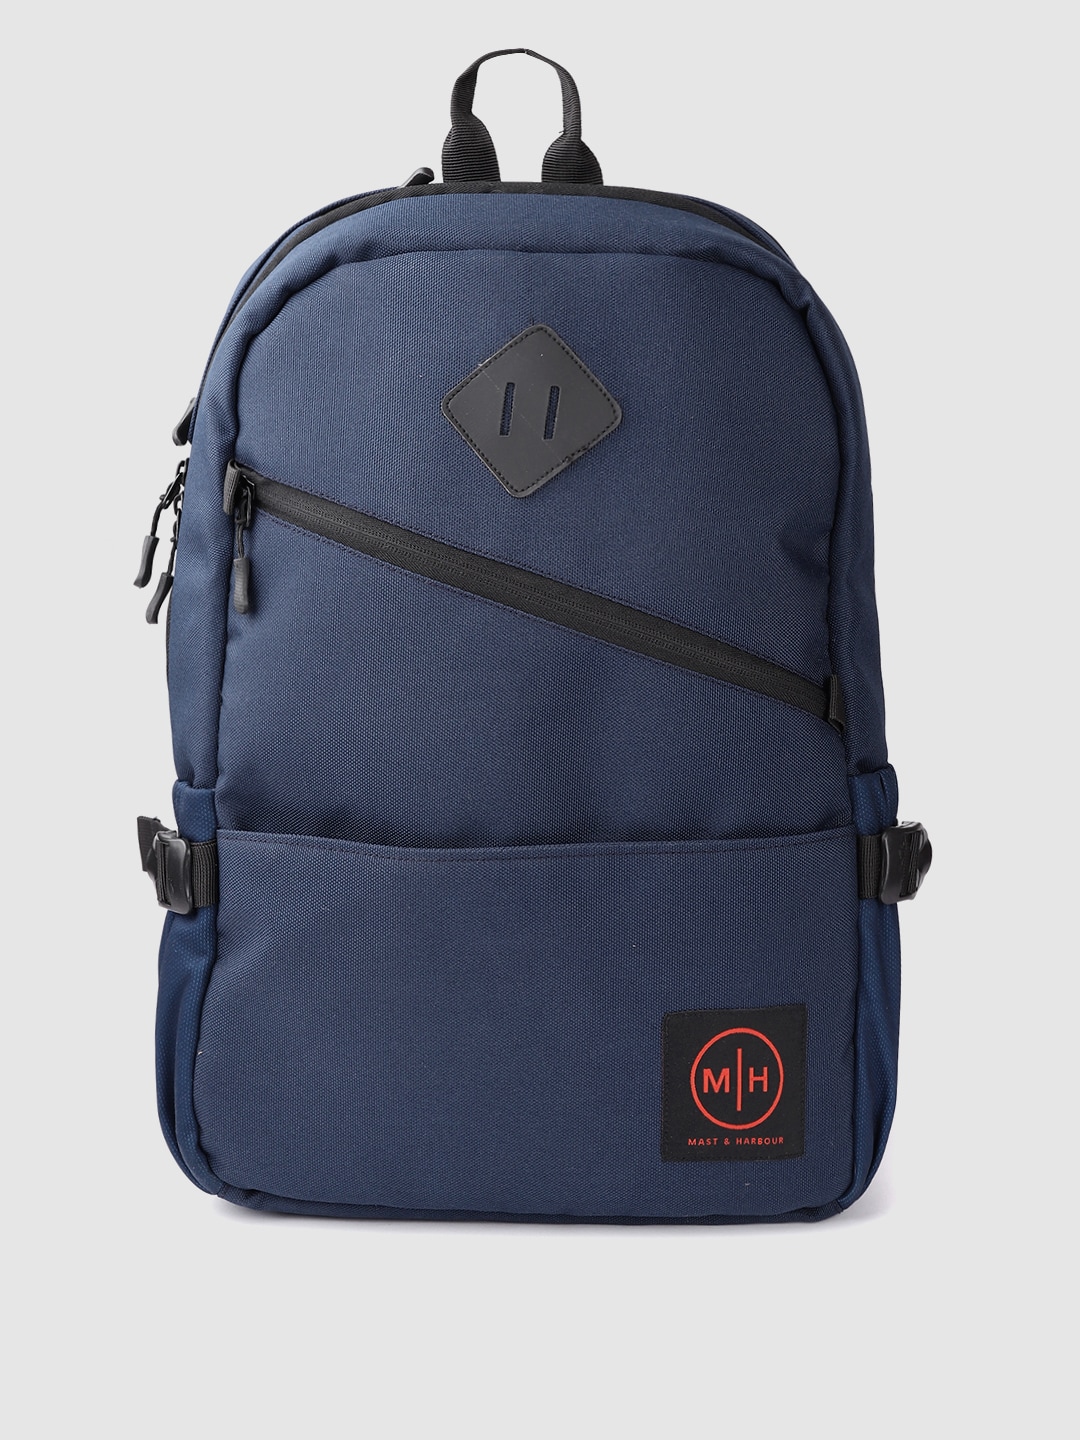 Mast & Harbour Unisex Navy Blue Solid Backpack 16.2 L Price in India